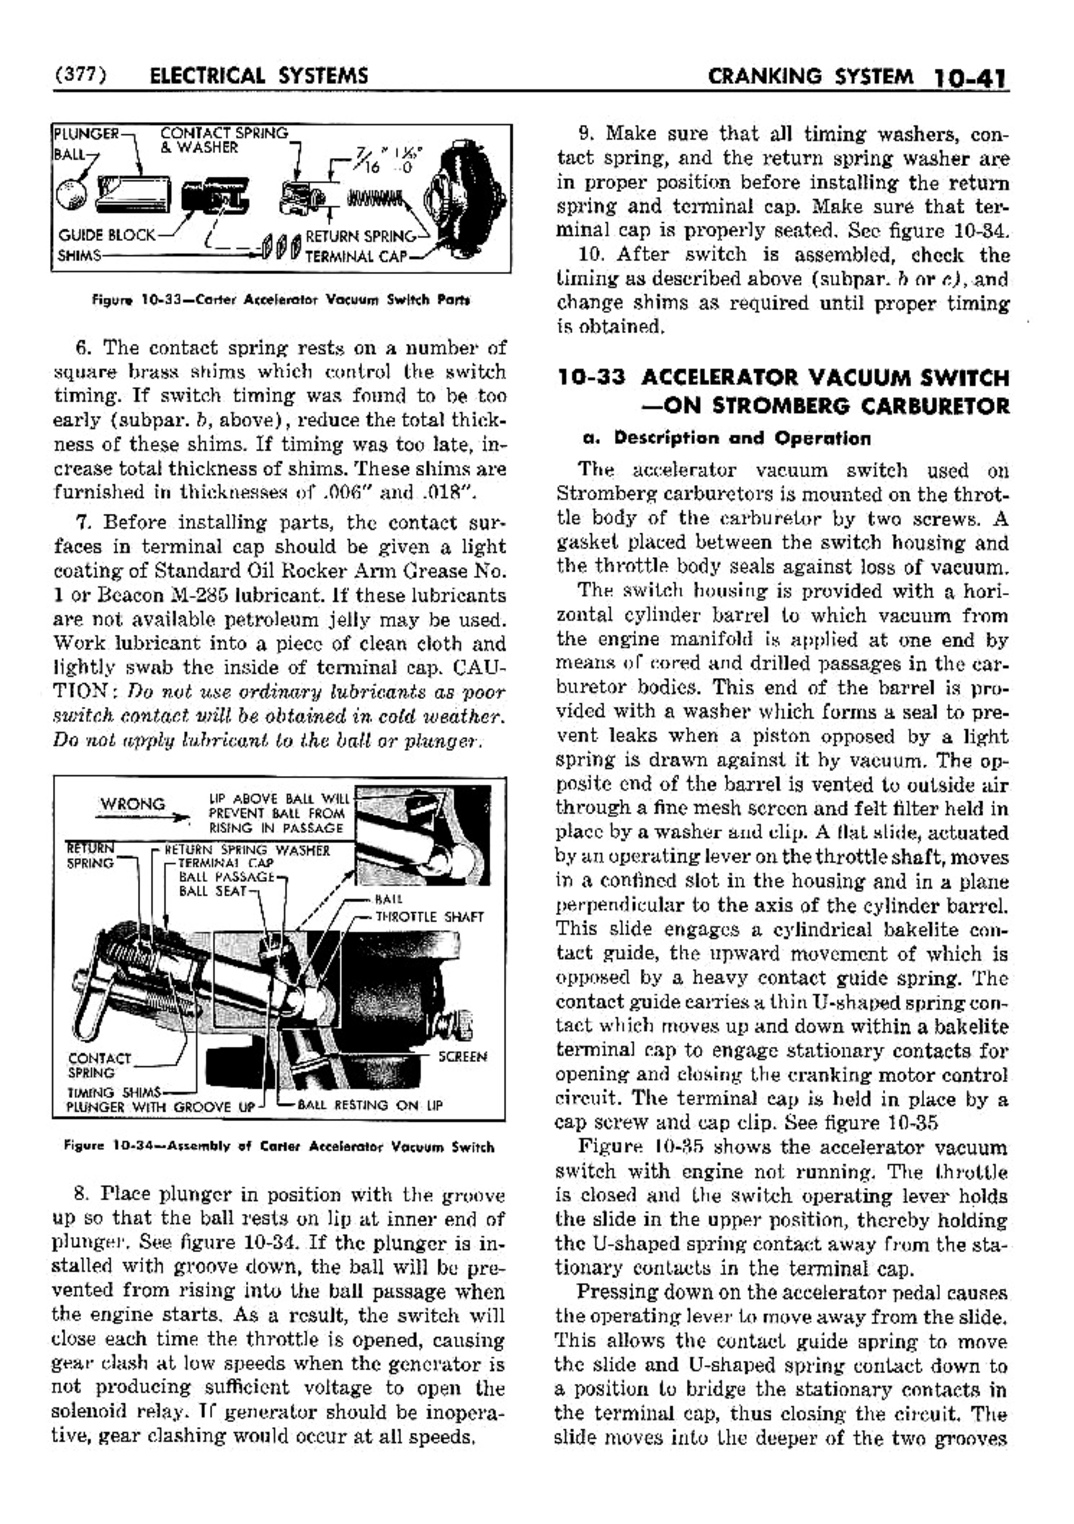 n_11 1952 Buick Shop Manual - Electrical Systems-041-041.jpg